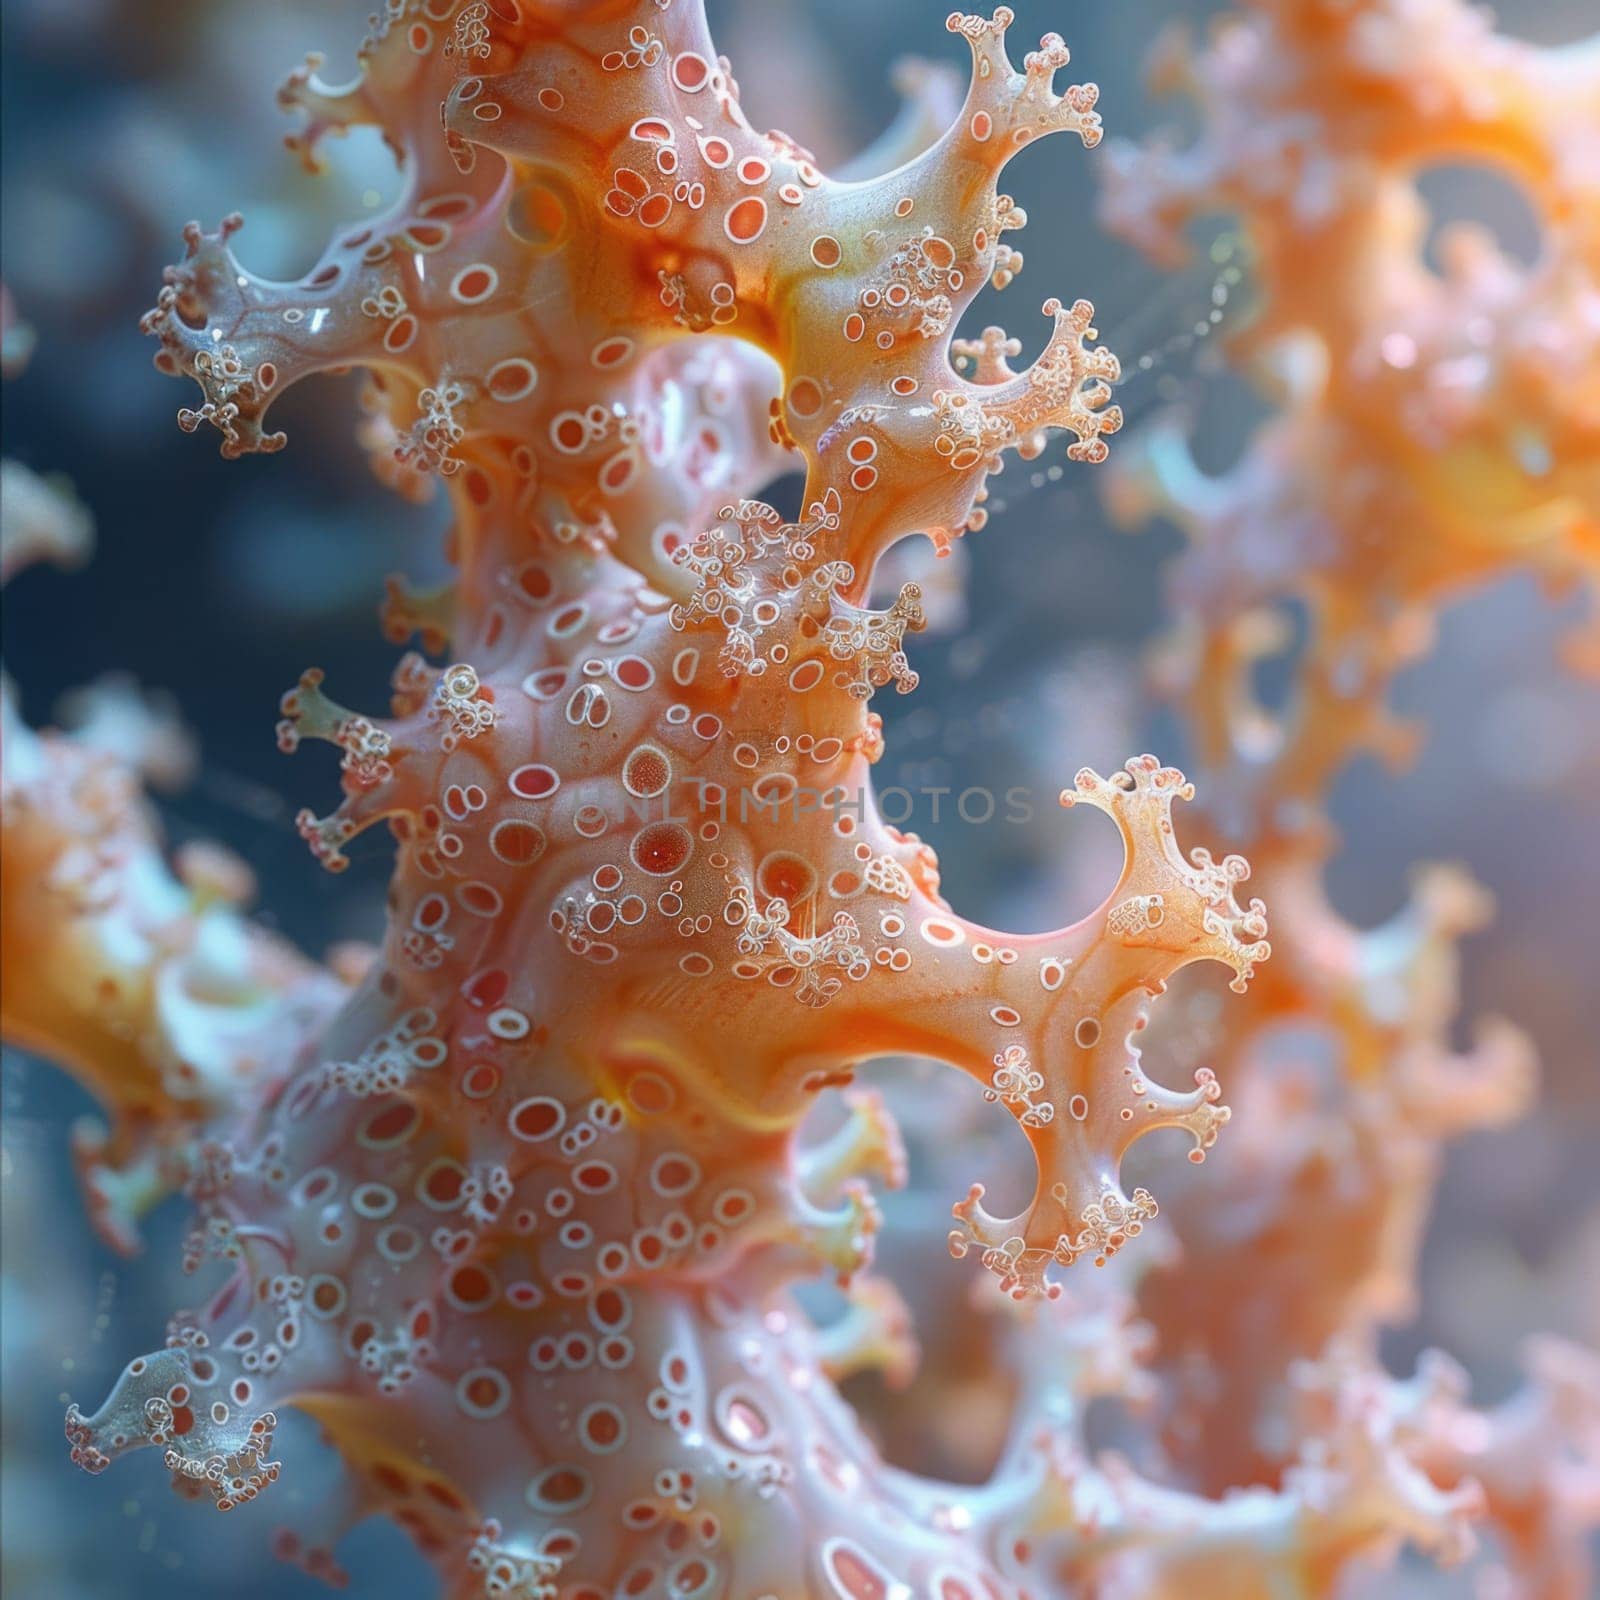 Detailed view of a coral structure covered with numerous small bubbles.